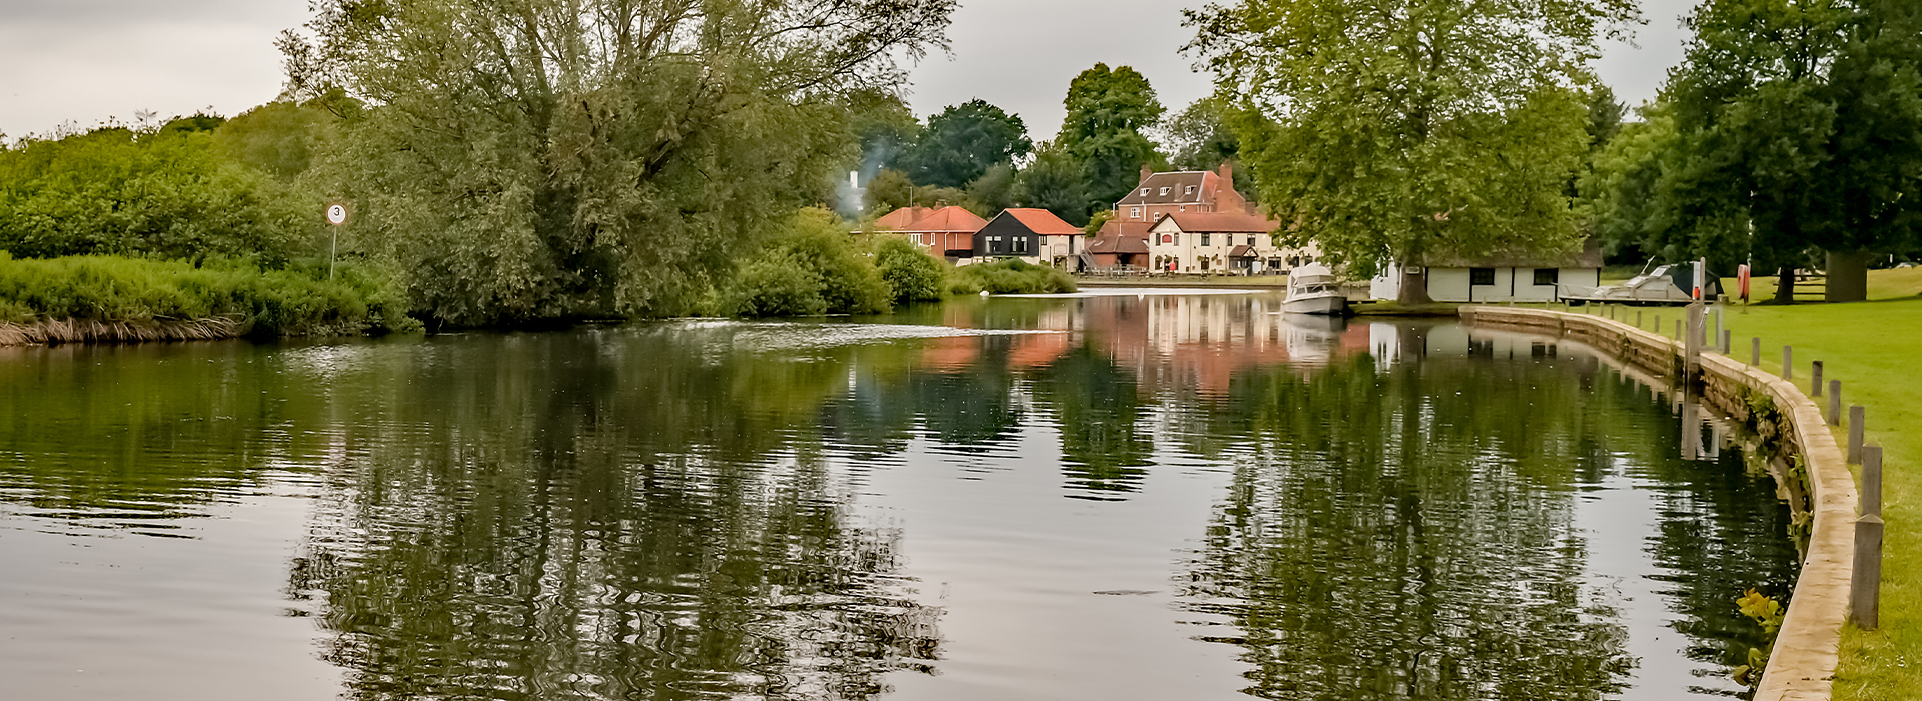 Pubs & Restaurants in the Broads National Park